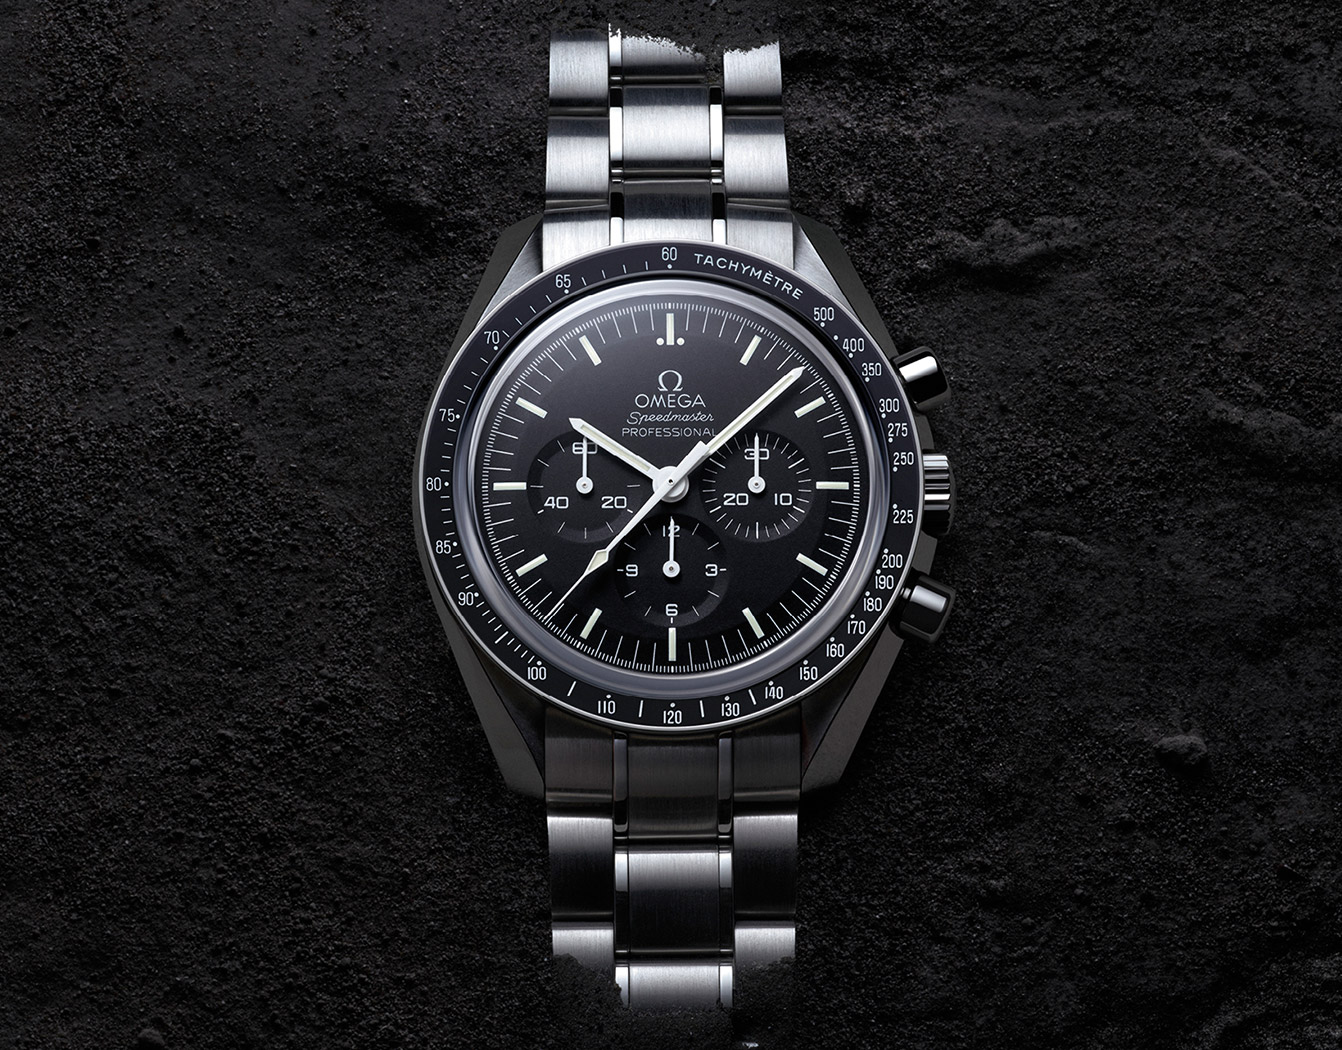 The SpeedMaster Series, one of OMEGA's iconic timepieces